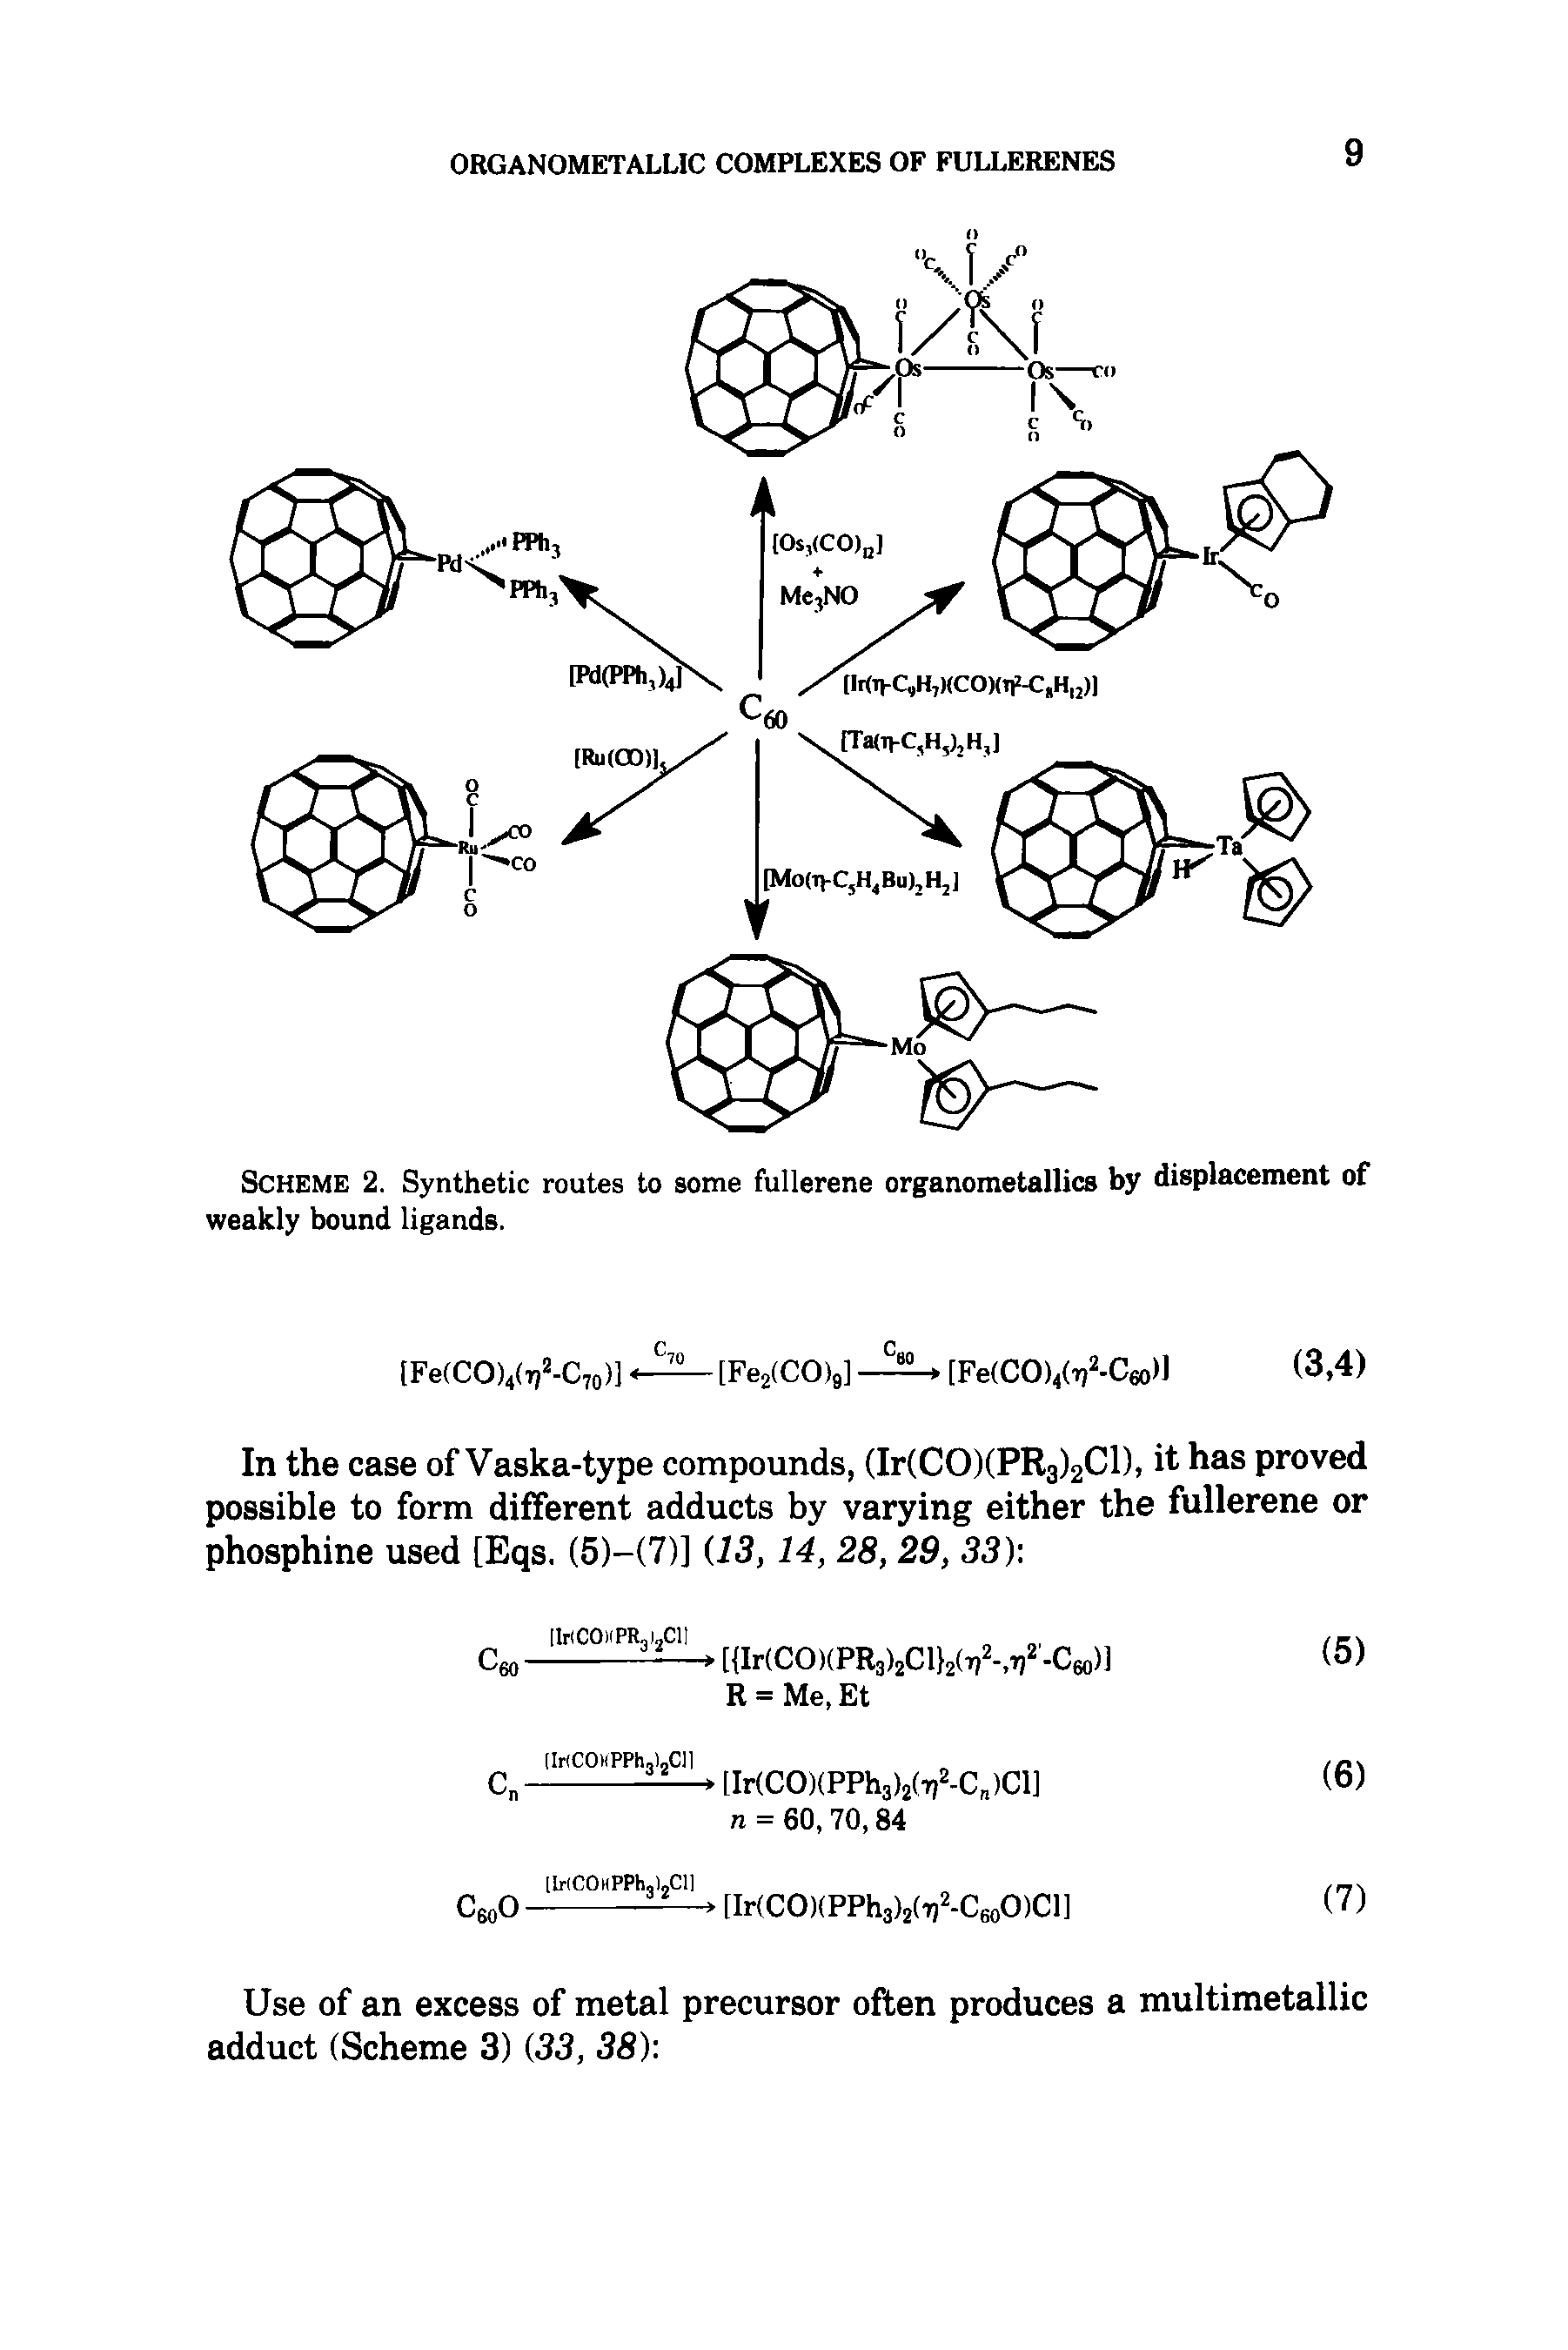 Scheme 2. Synthetic routes to some fullerene organometallics by displacement of weakly bound ligands.